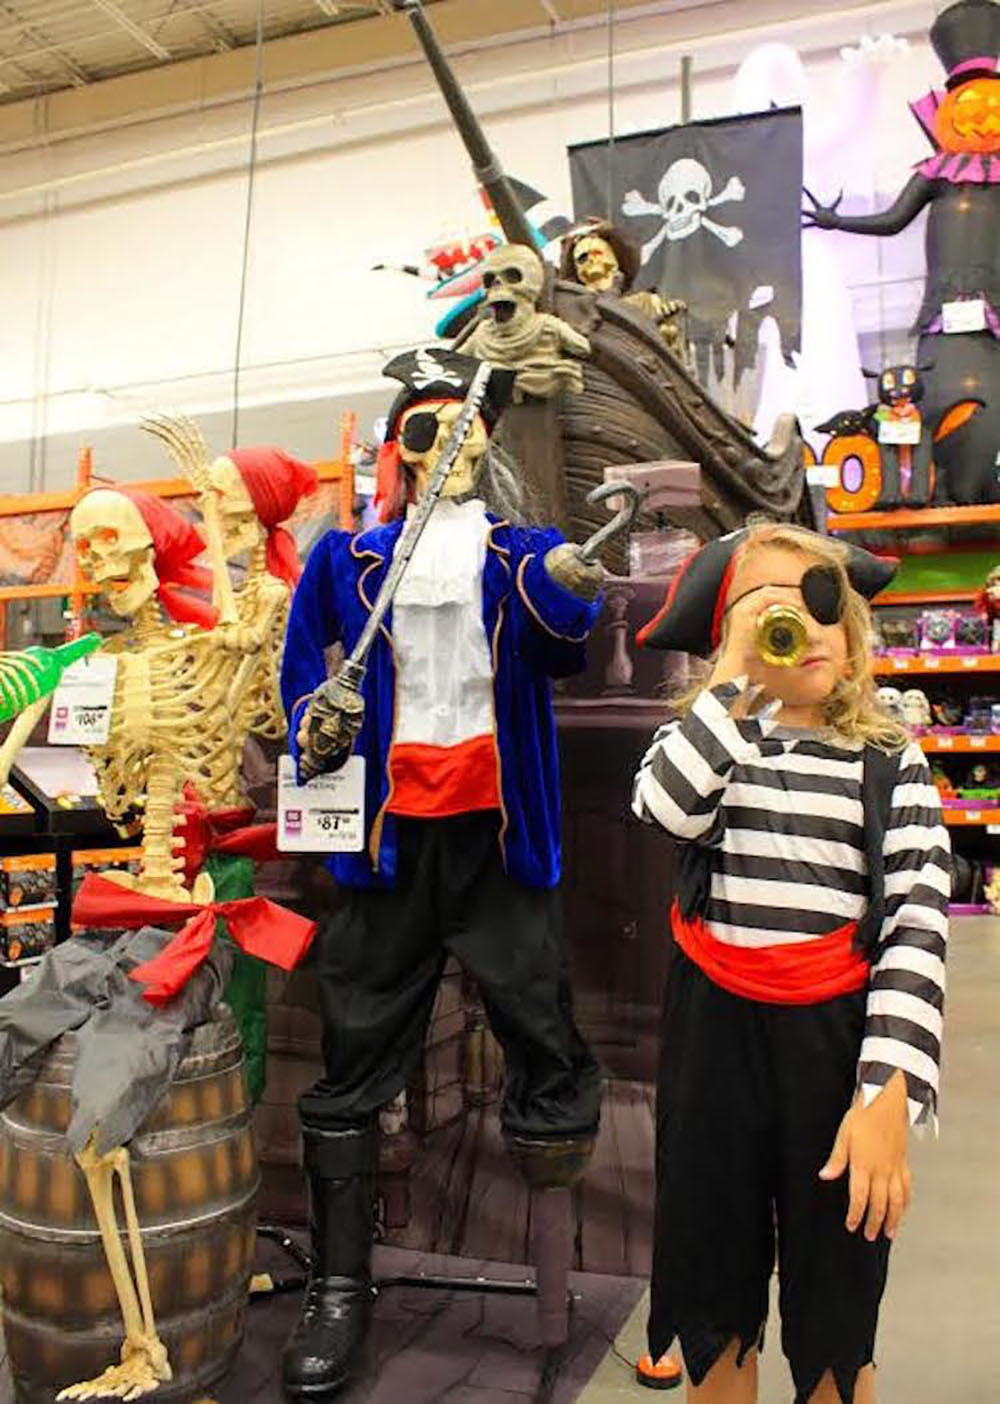 A child dressed as a pirate stands next to a skeleton pirate inside The Home Depot.